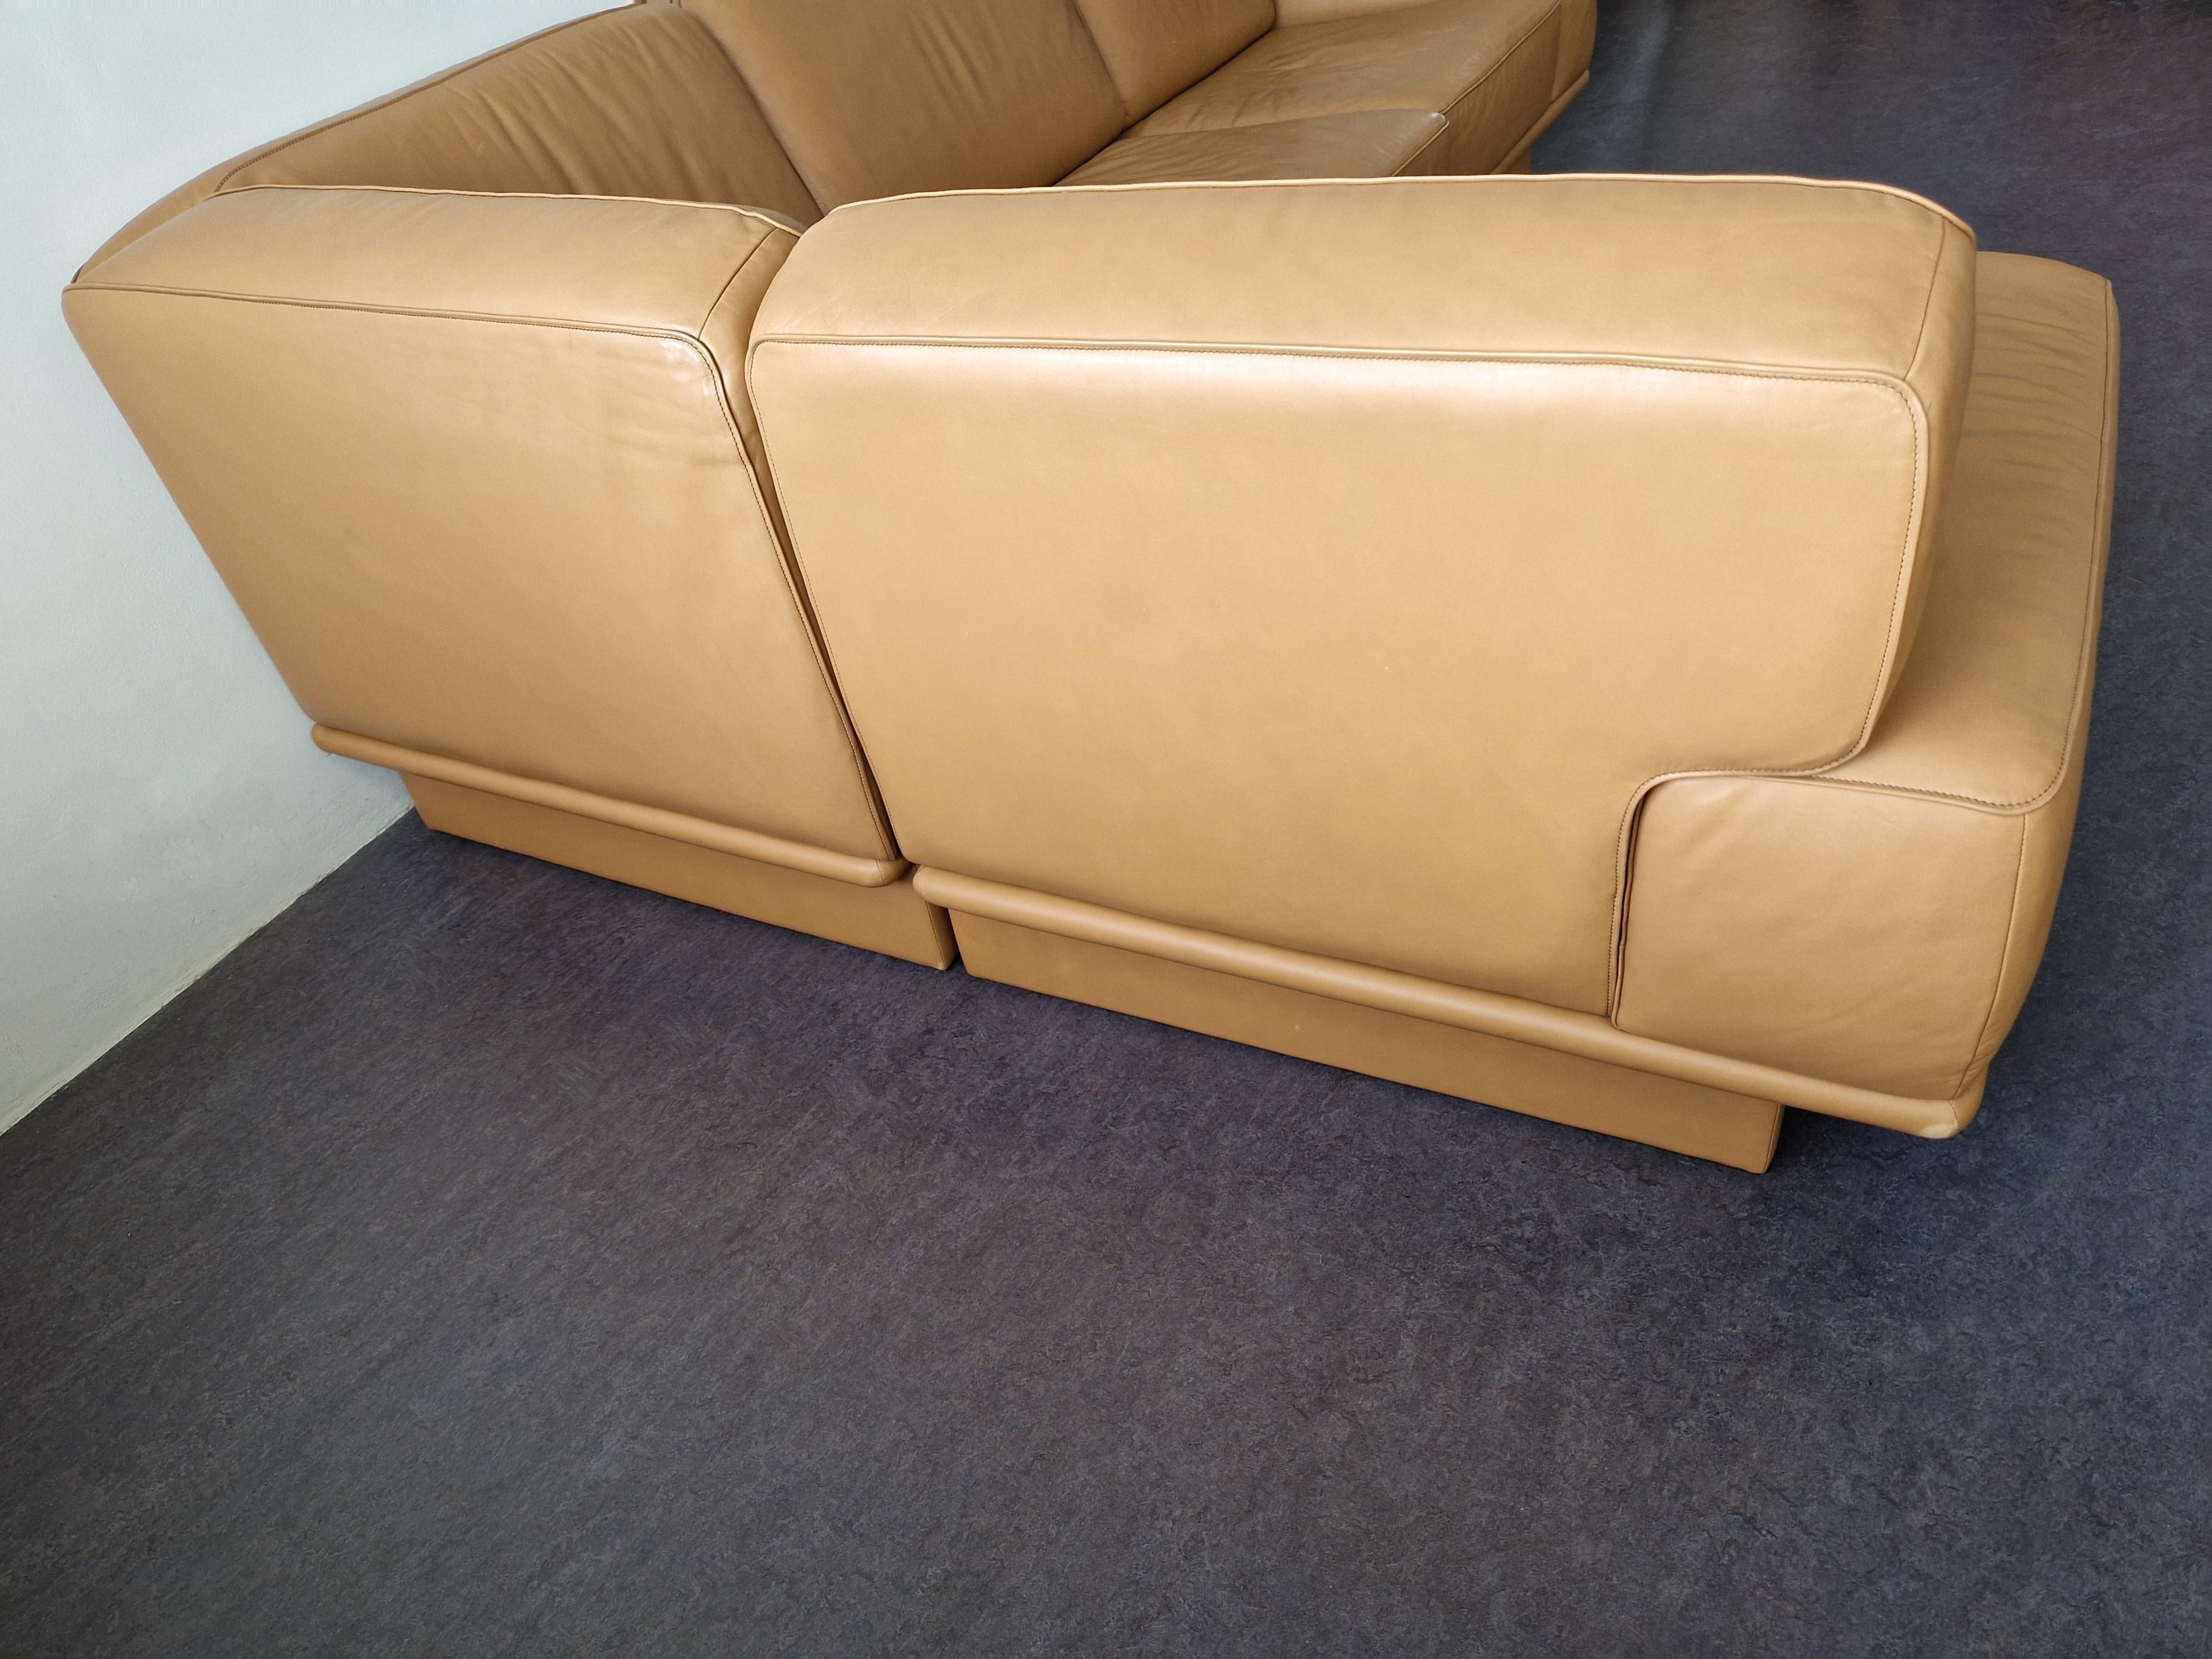 Midcentury Leather Sectional Corner Sofa by De Sede, Switzerland For Sale 5